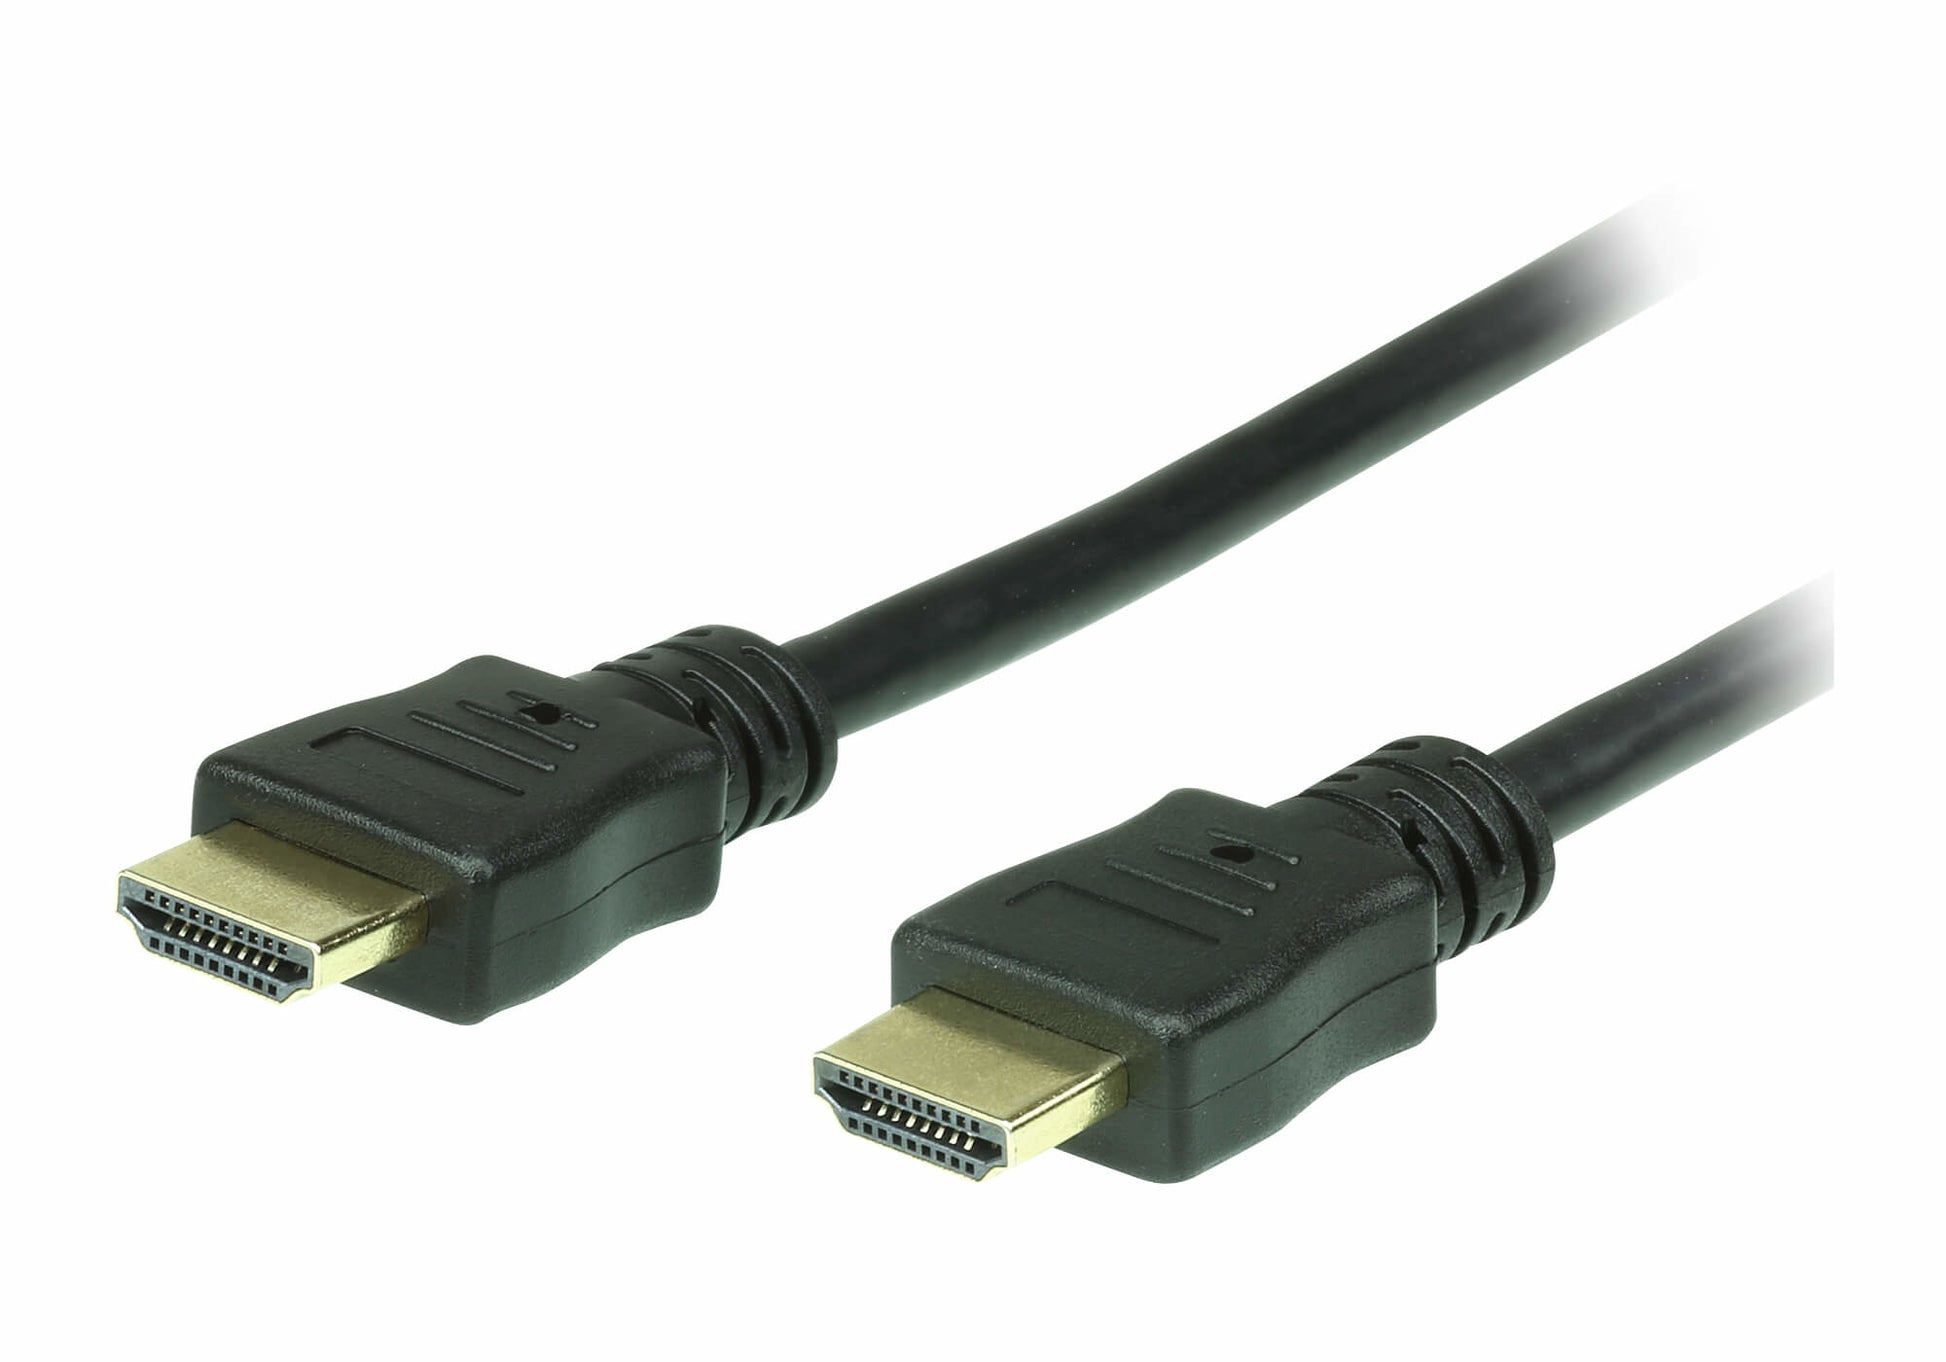 ATEN High Speed HDMI Cable with Ethernet True 4K ( 4096X2160 @ 60Hz); 2 m HDMI Cable with Ethernet-2